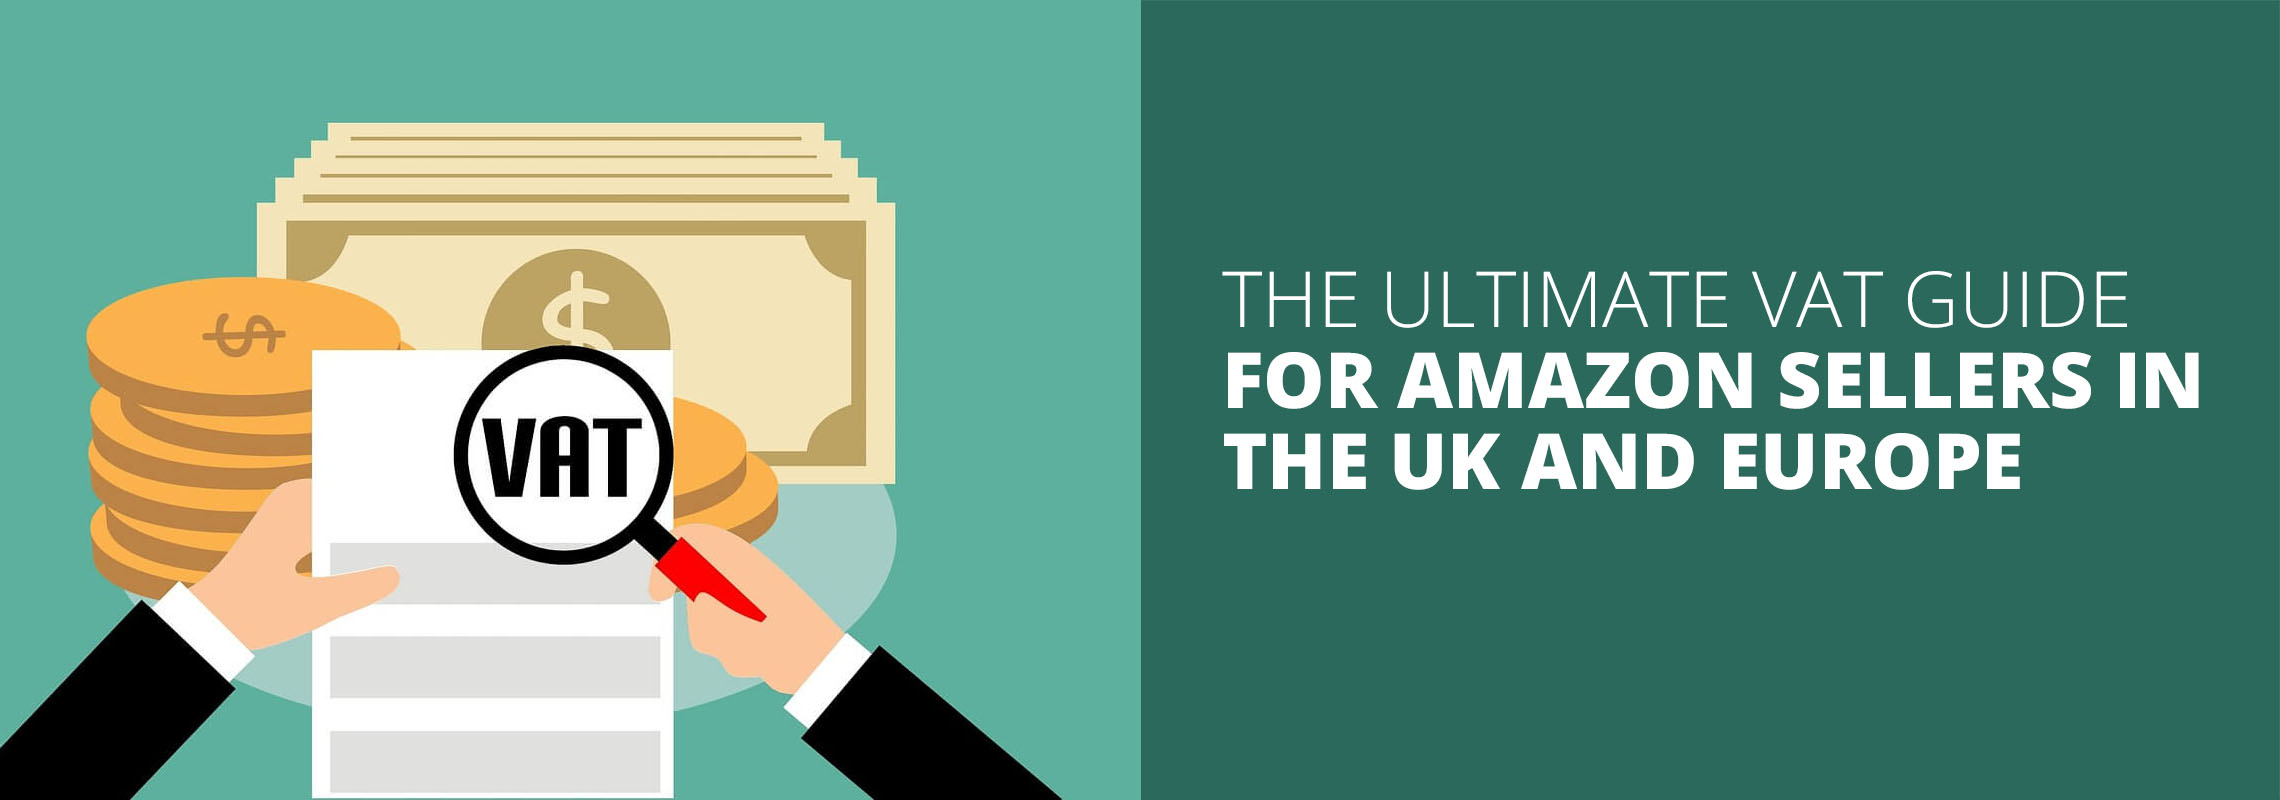 The Ultimate VAT Guide for Amazon Sellers in the UK and Europe